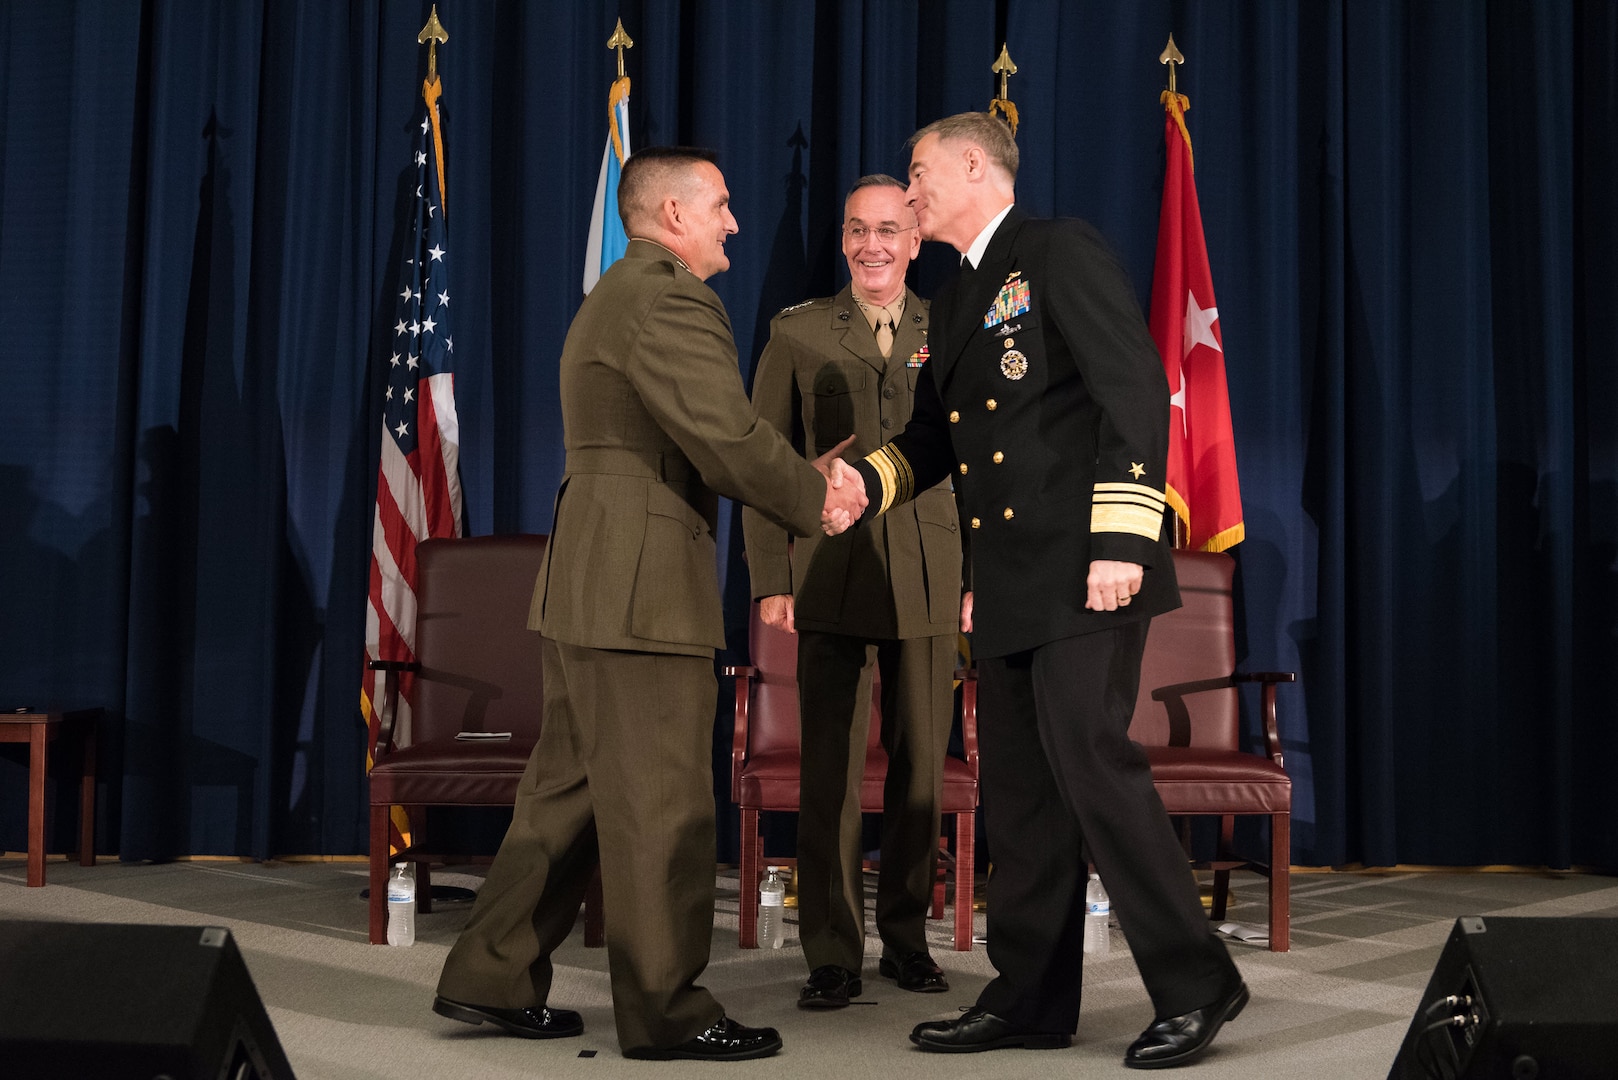 Maj Gen Padilla shakes hands with VADM Roegge with Gen Dunford looking on.